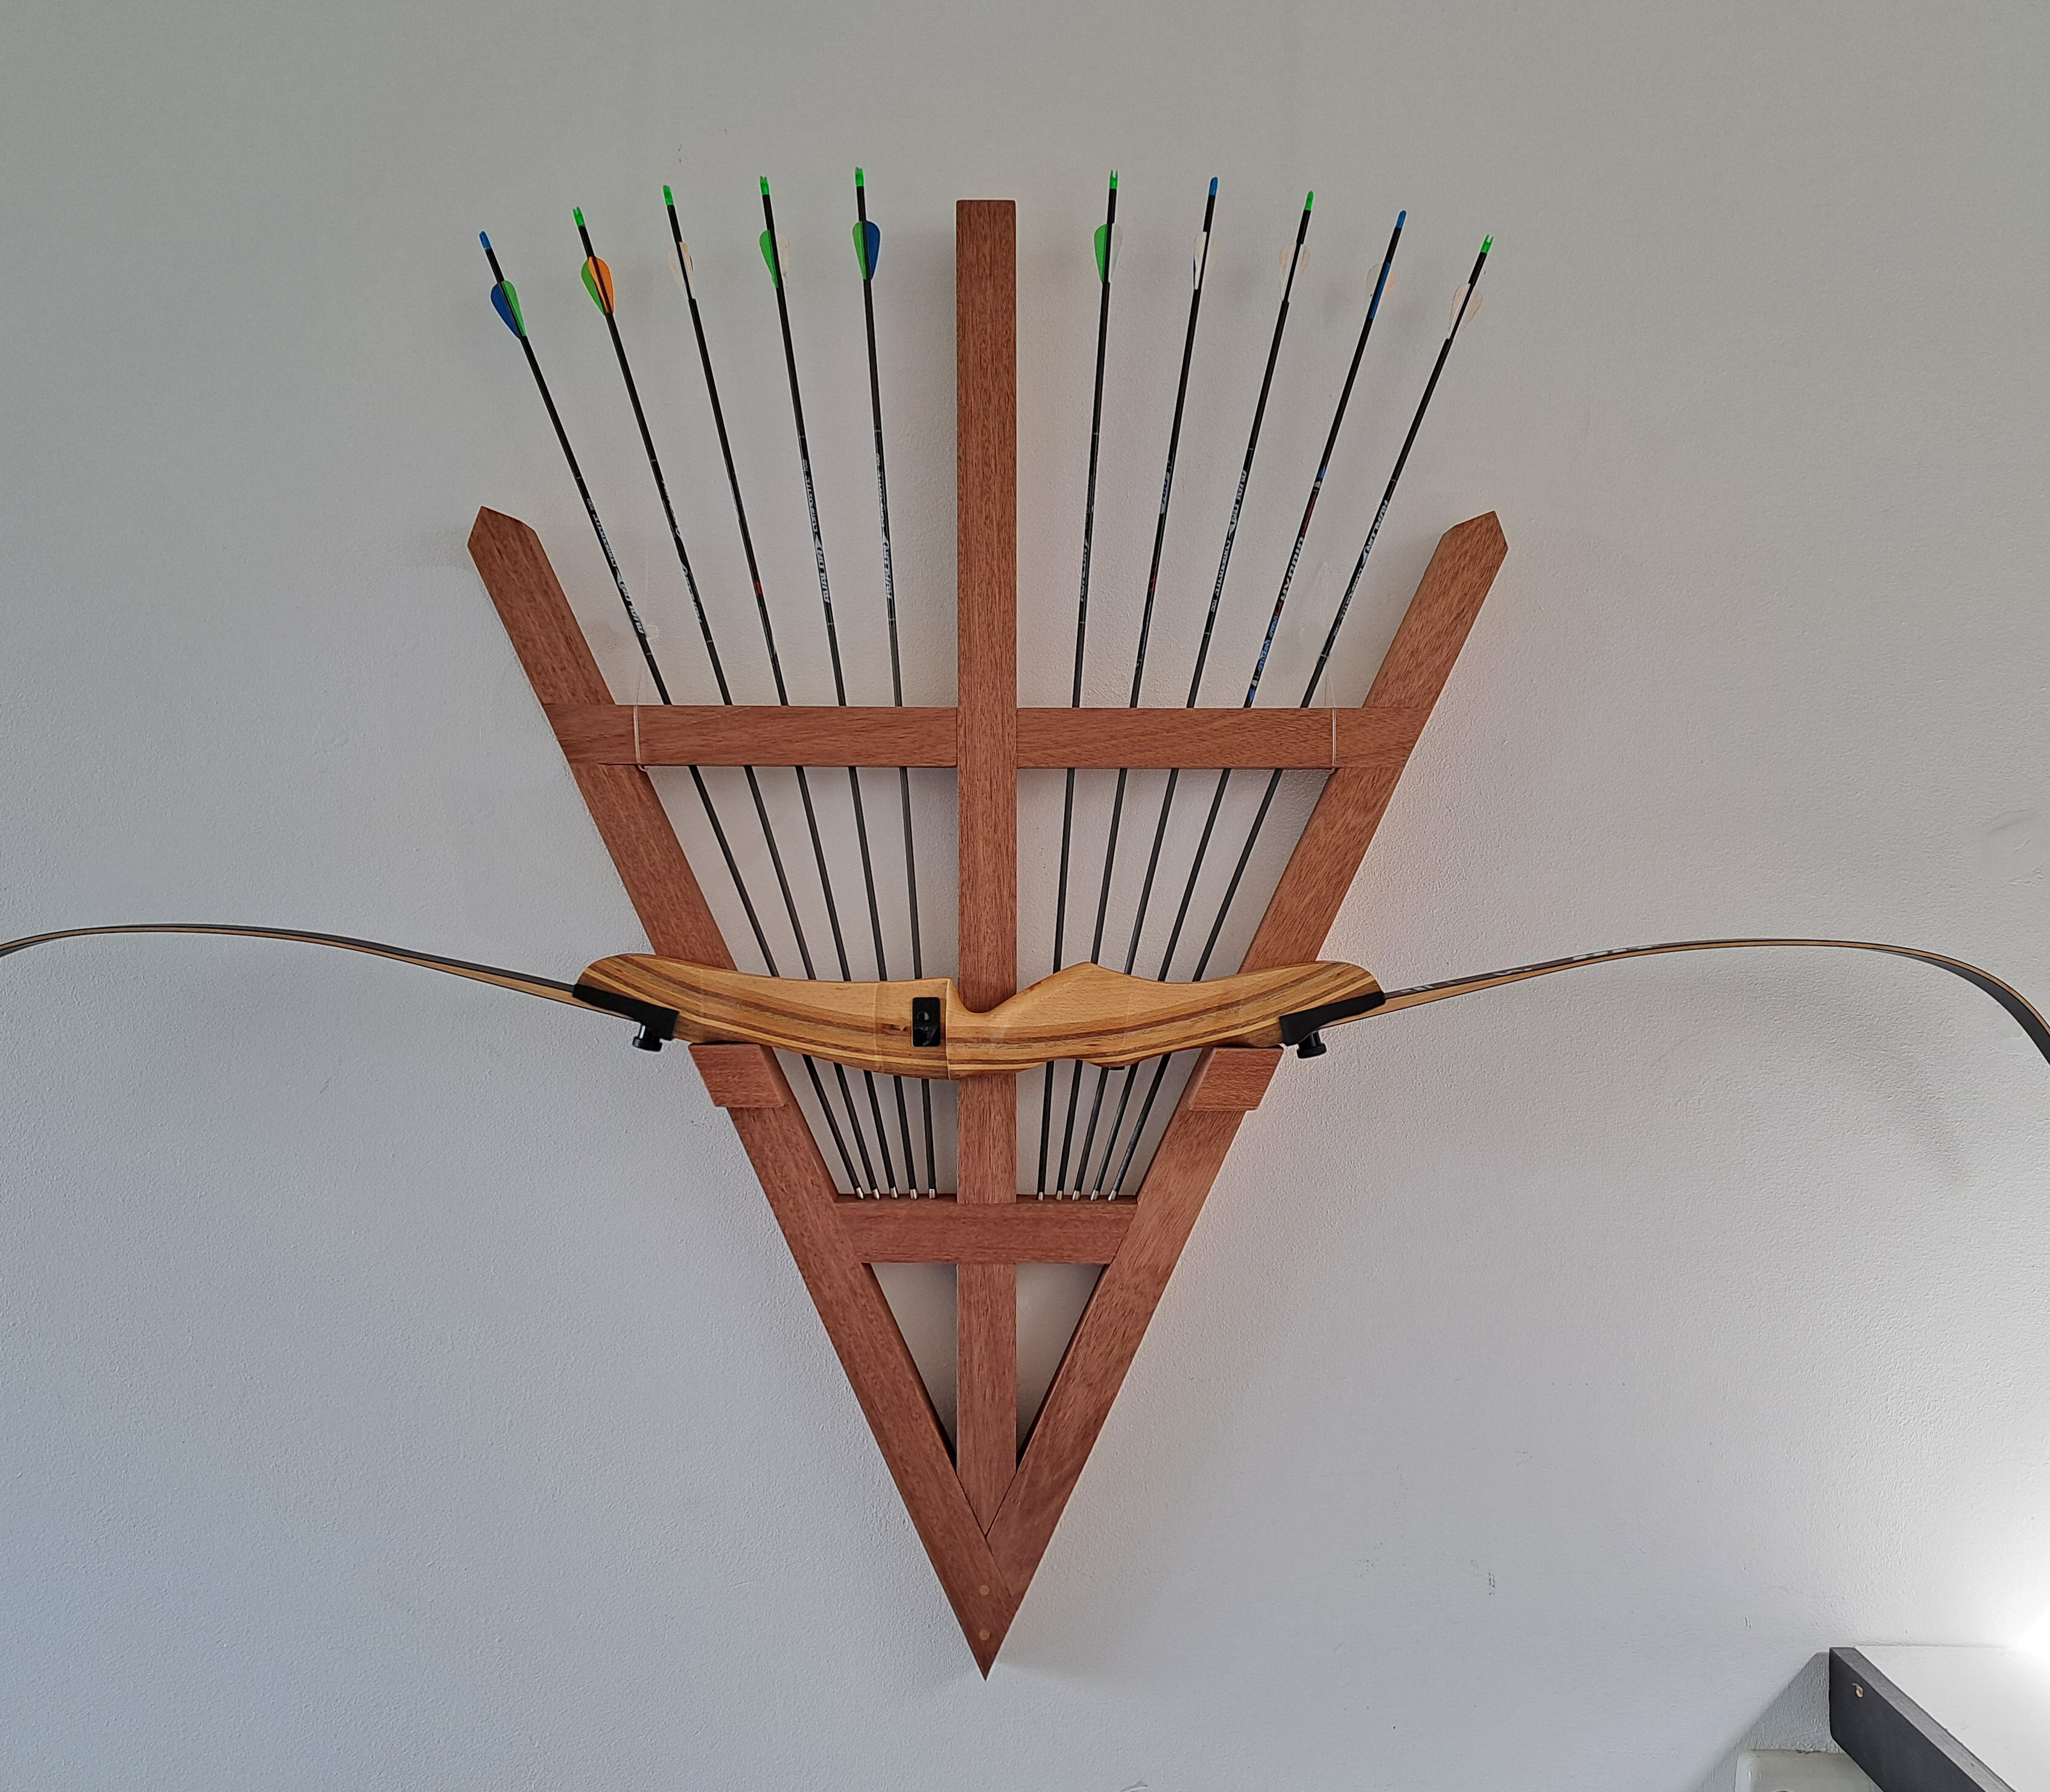 Bow Rack Without Any Nails or Screws